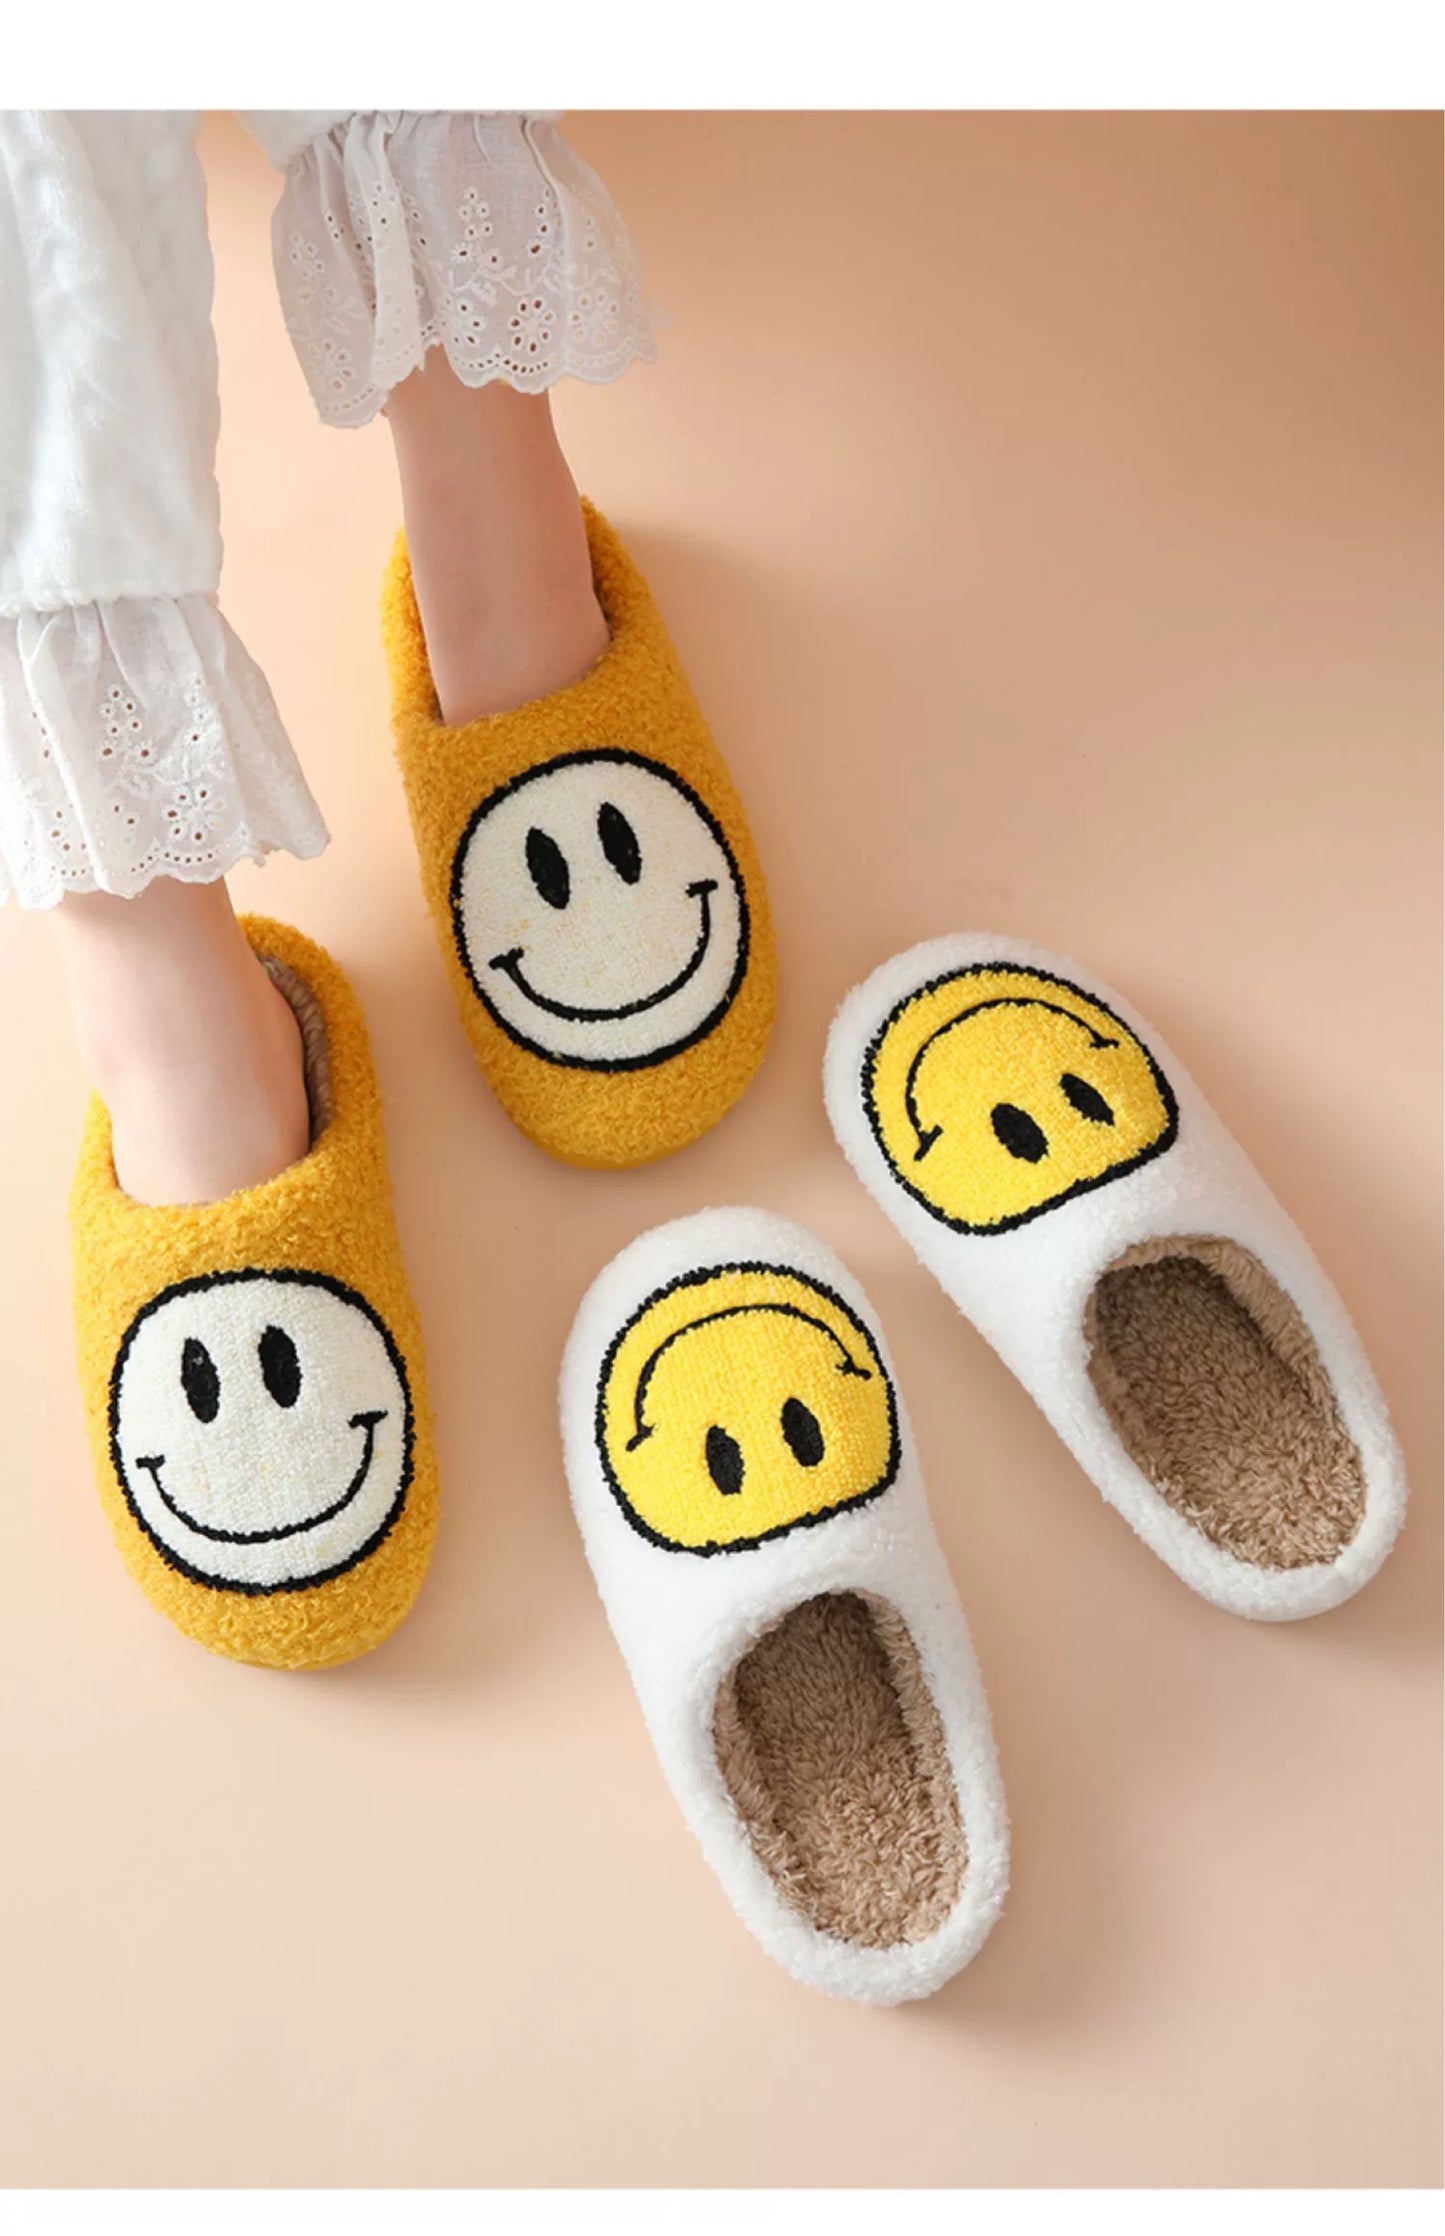 Cute Smiley Plush Slip-on Home slippers  slippers Thecurvestory